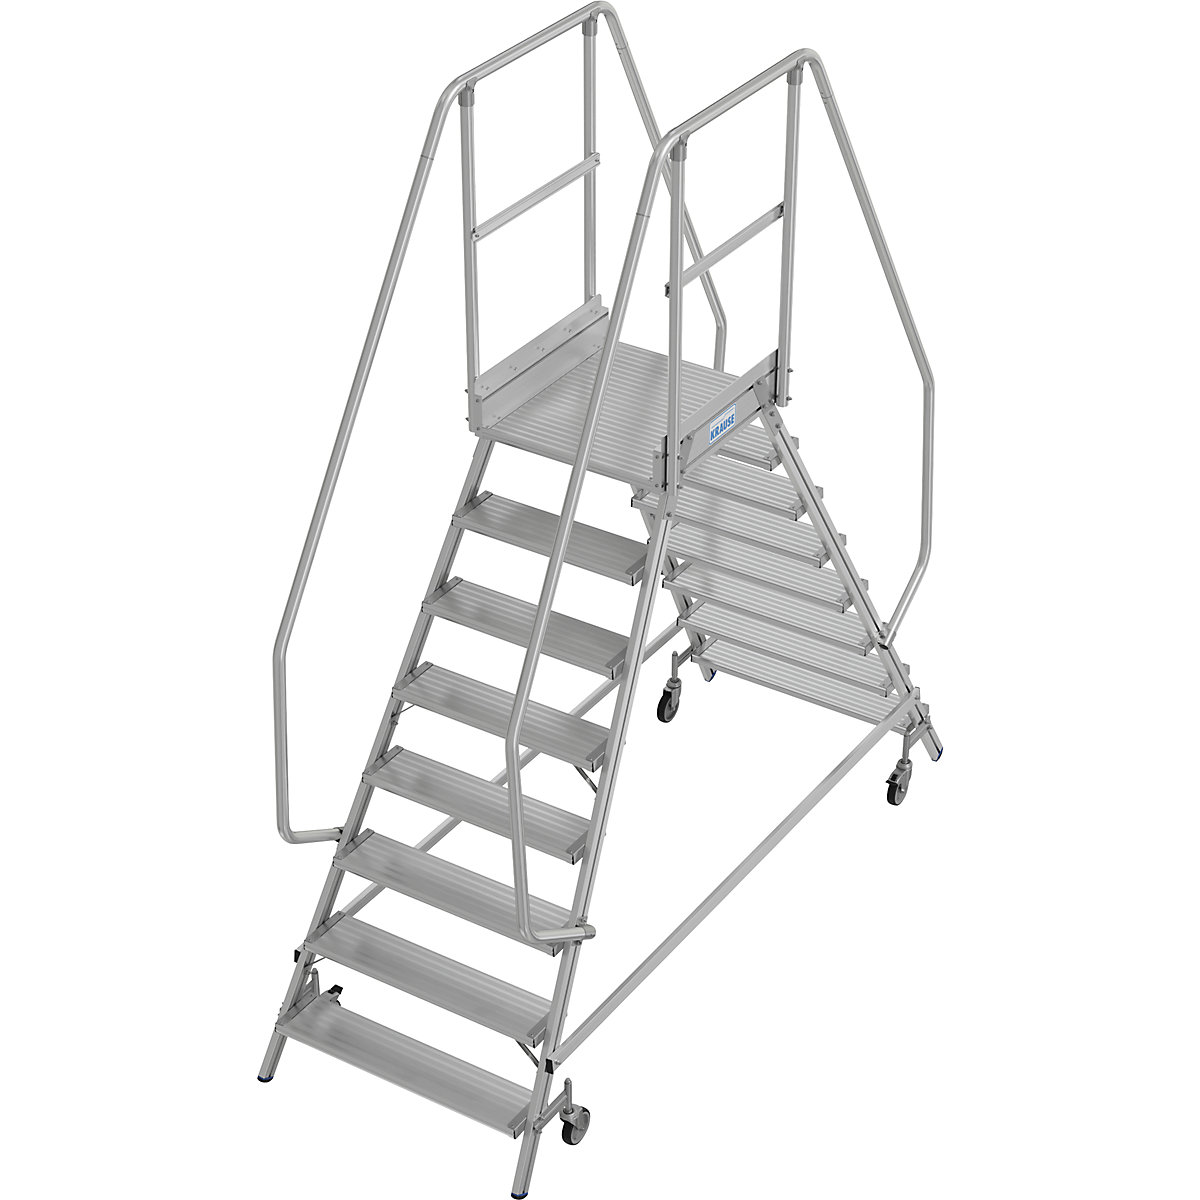 Mobile safety steps – KRAUSE, double sided access, foot rail, 2 x 8 steps-11